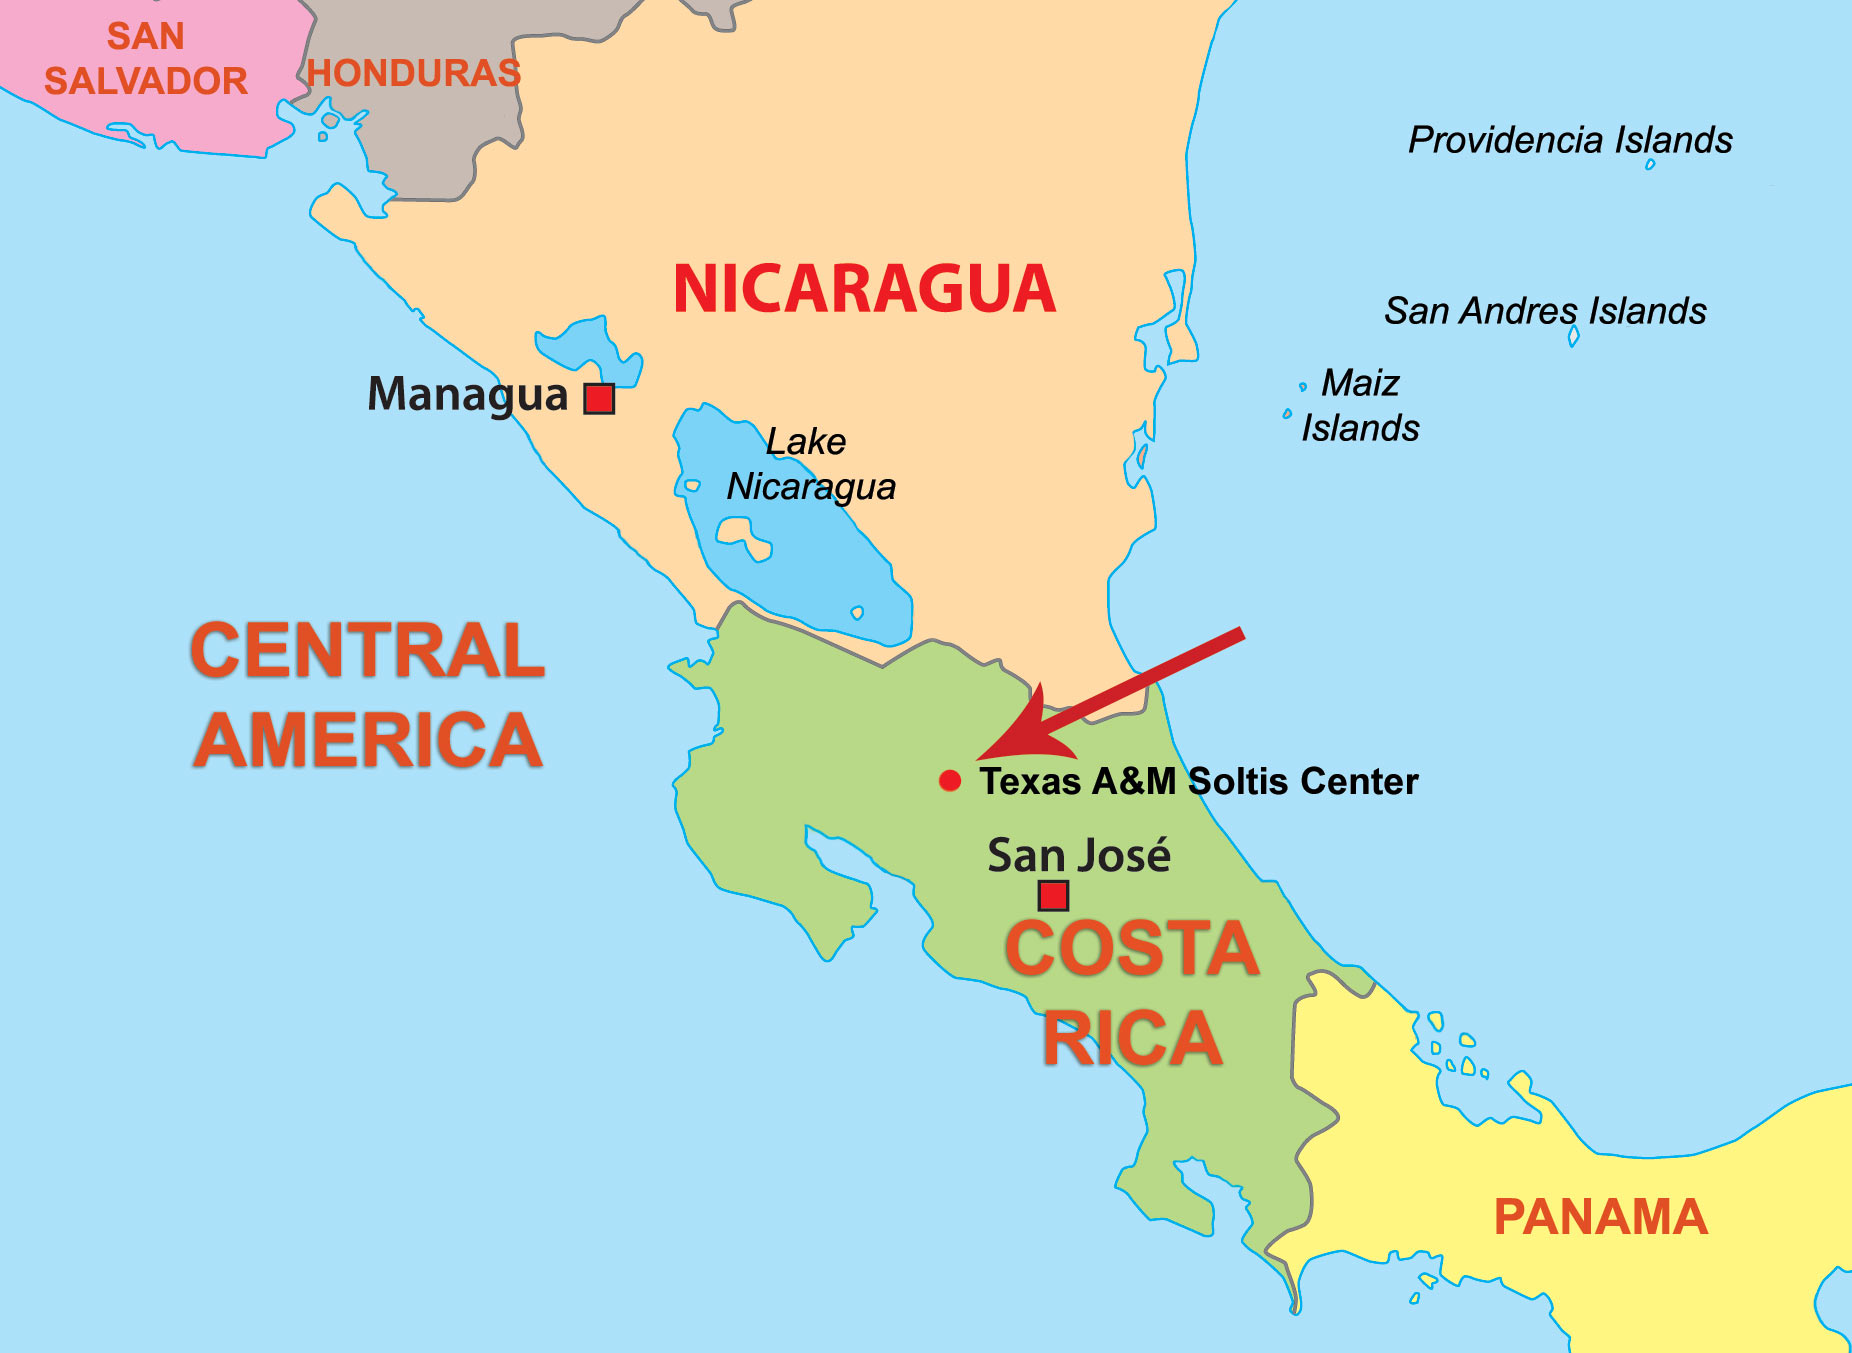 map of Central America with Texas A&M Soltis Center location identified